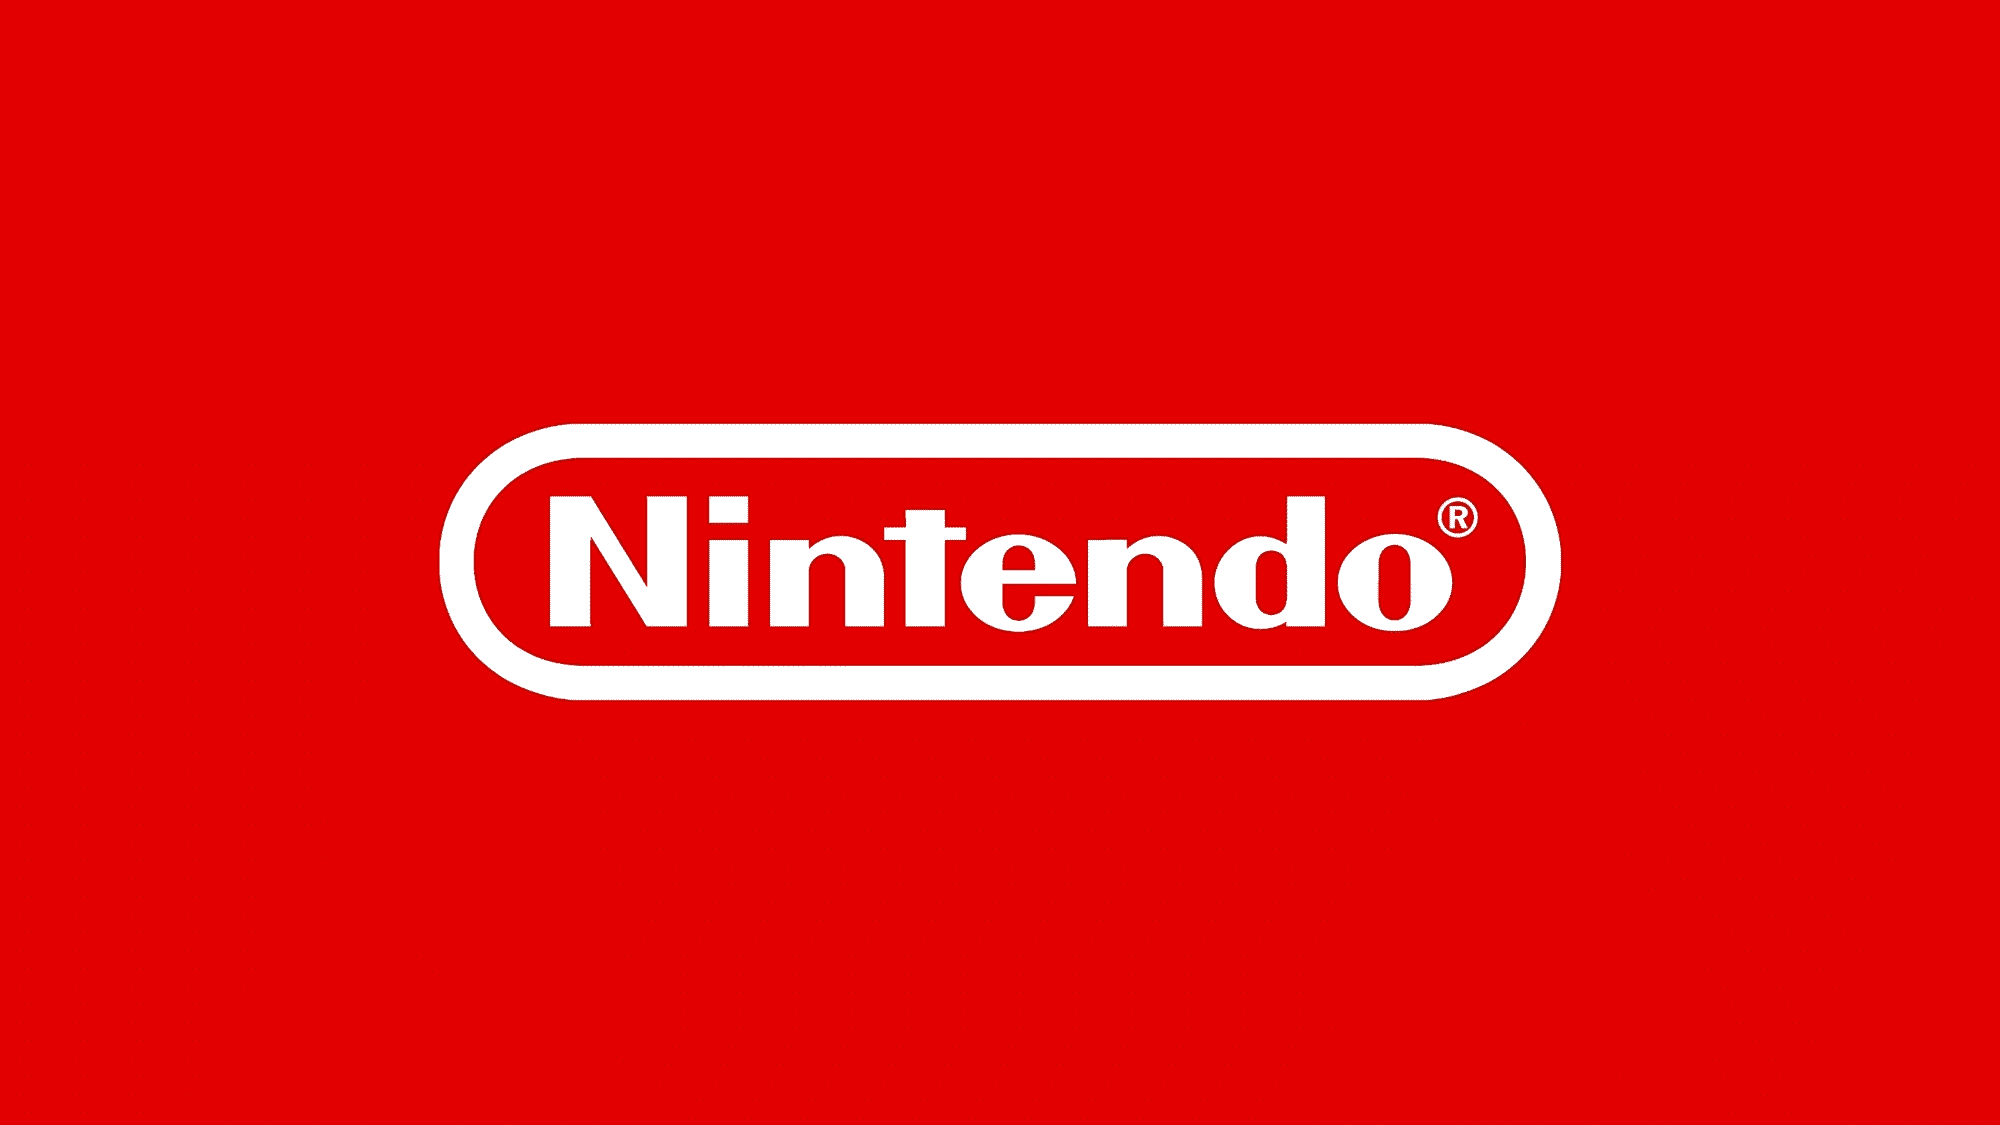 Nintendo Is Launching A New Console Code Named "Revolution" (2005)